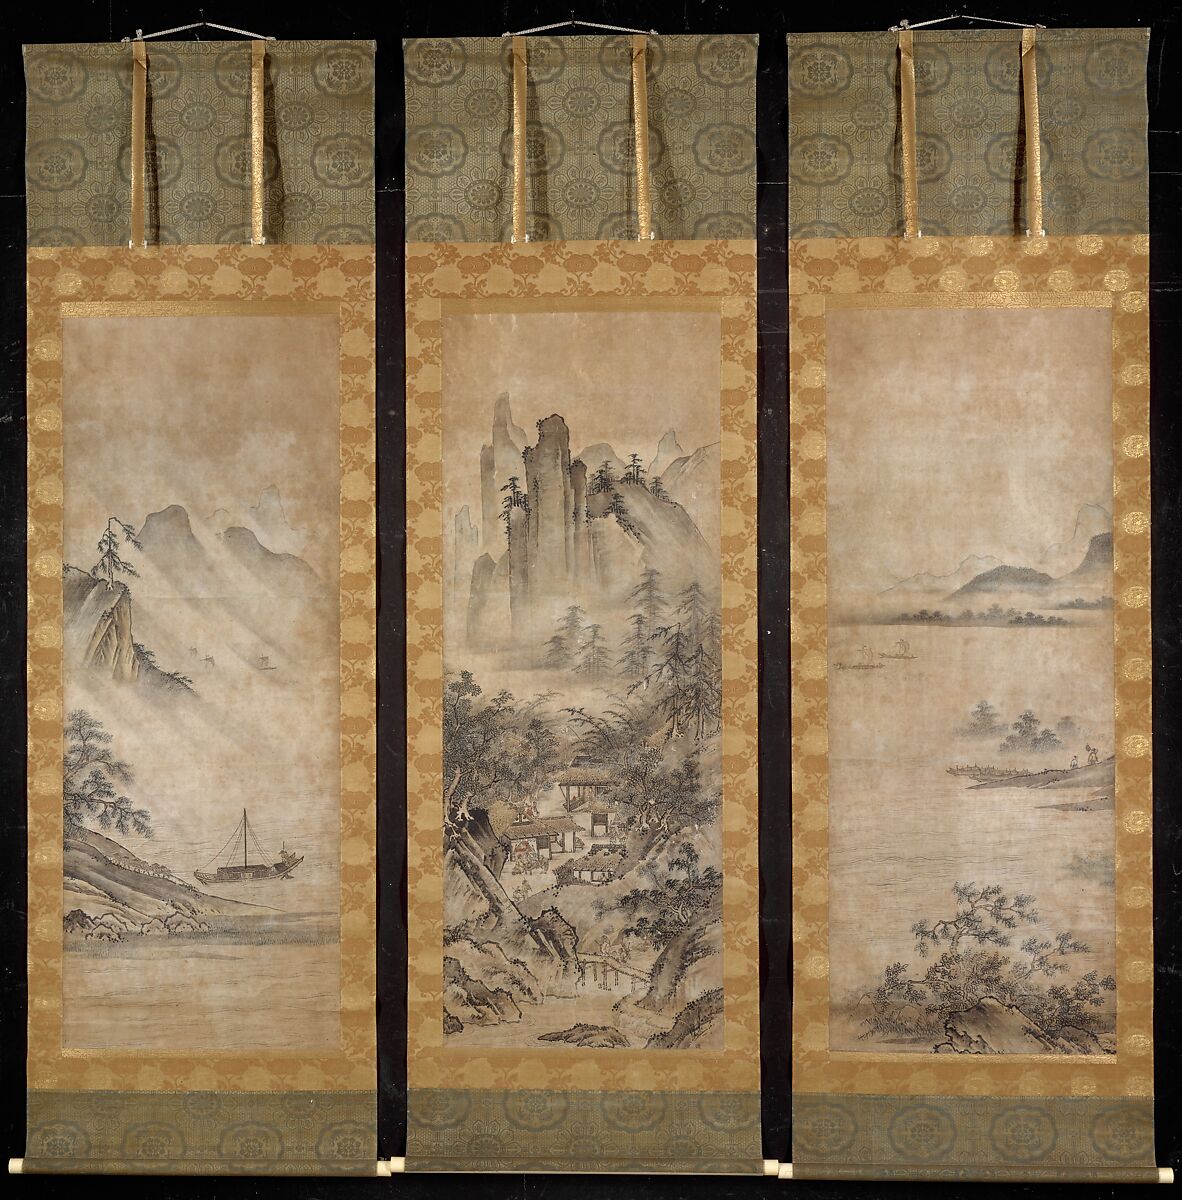 Eight Views of the Xiao and Xiang Rivers, One of a triptych of hanging scrolls; ink and color on paper, Japan 